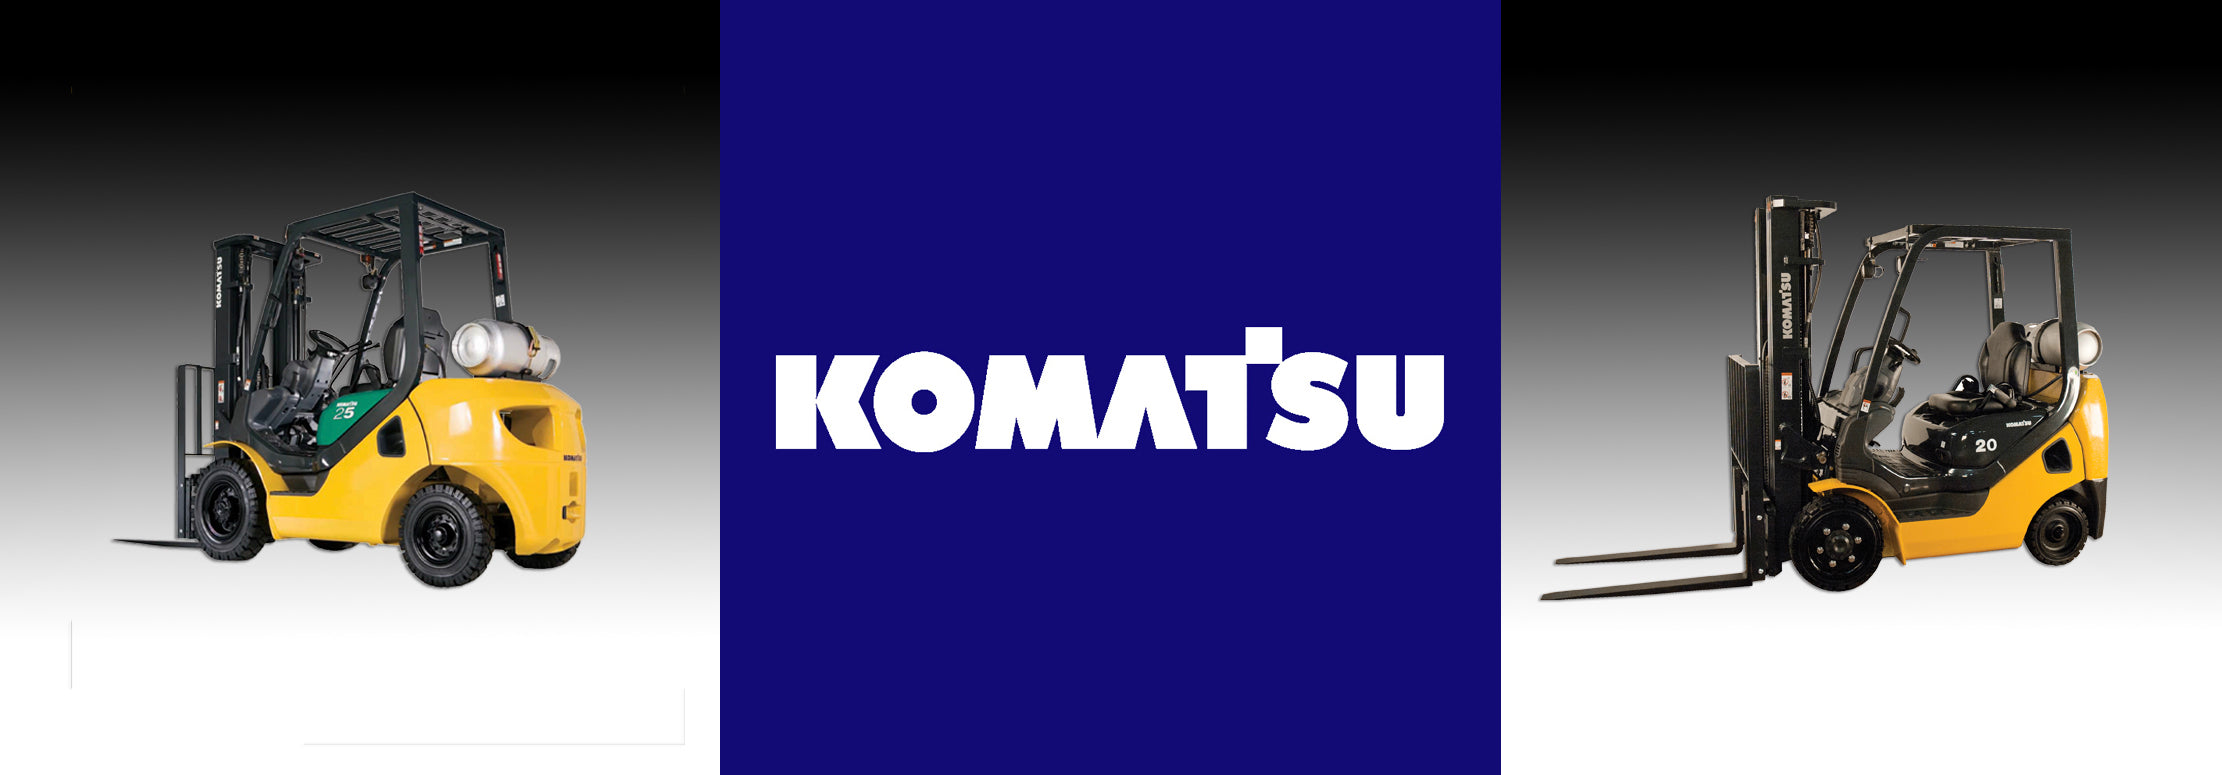 Komatsu equipment tire covers tire socks tire boots drip protection drip diapers surface protection